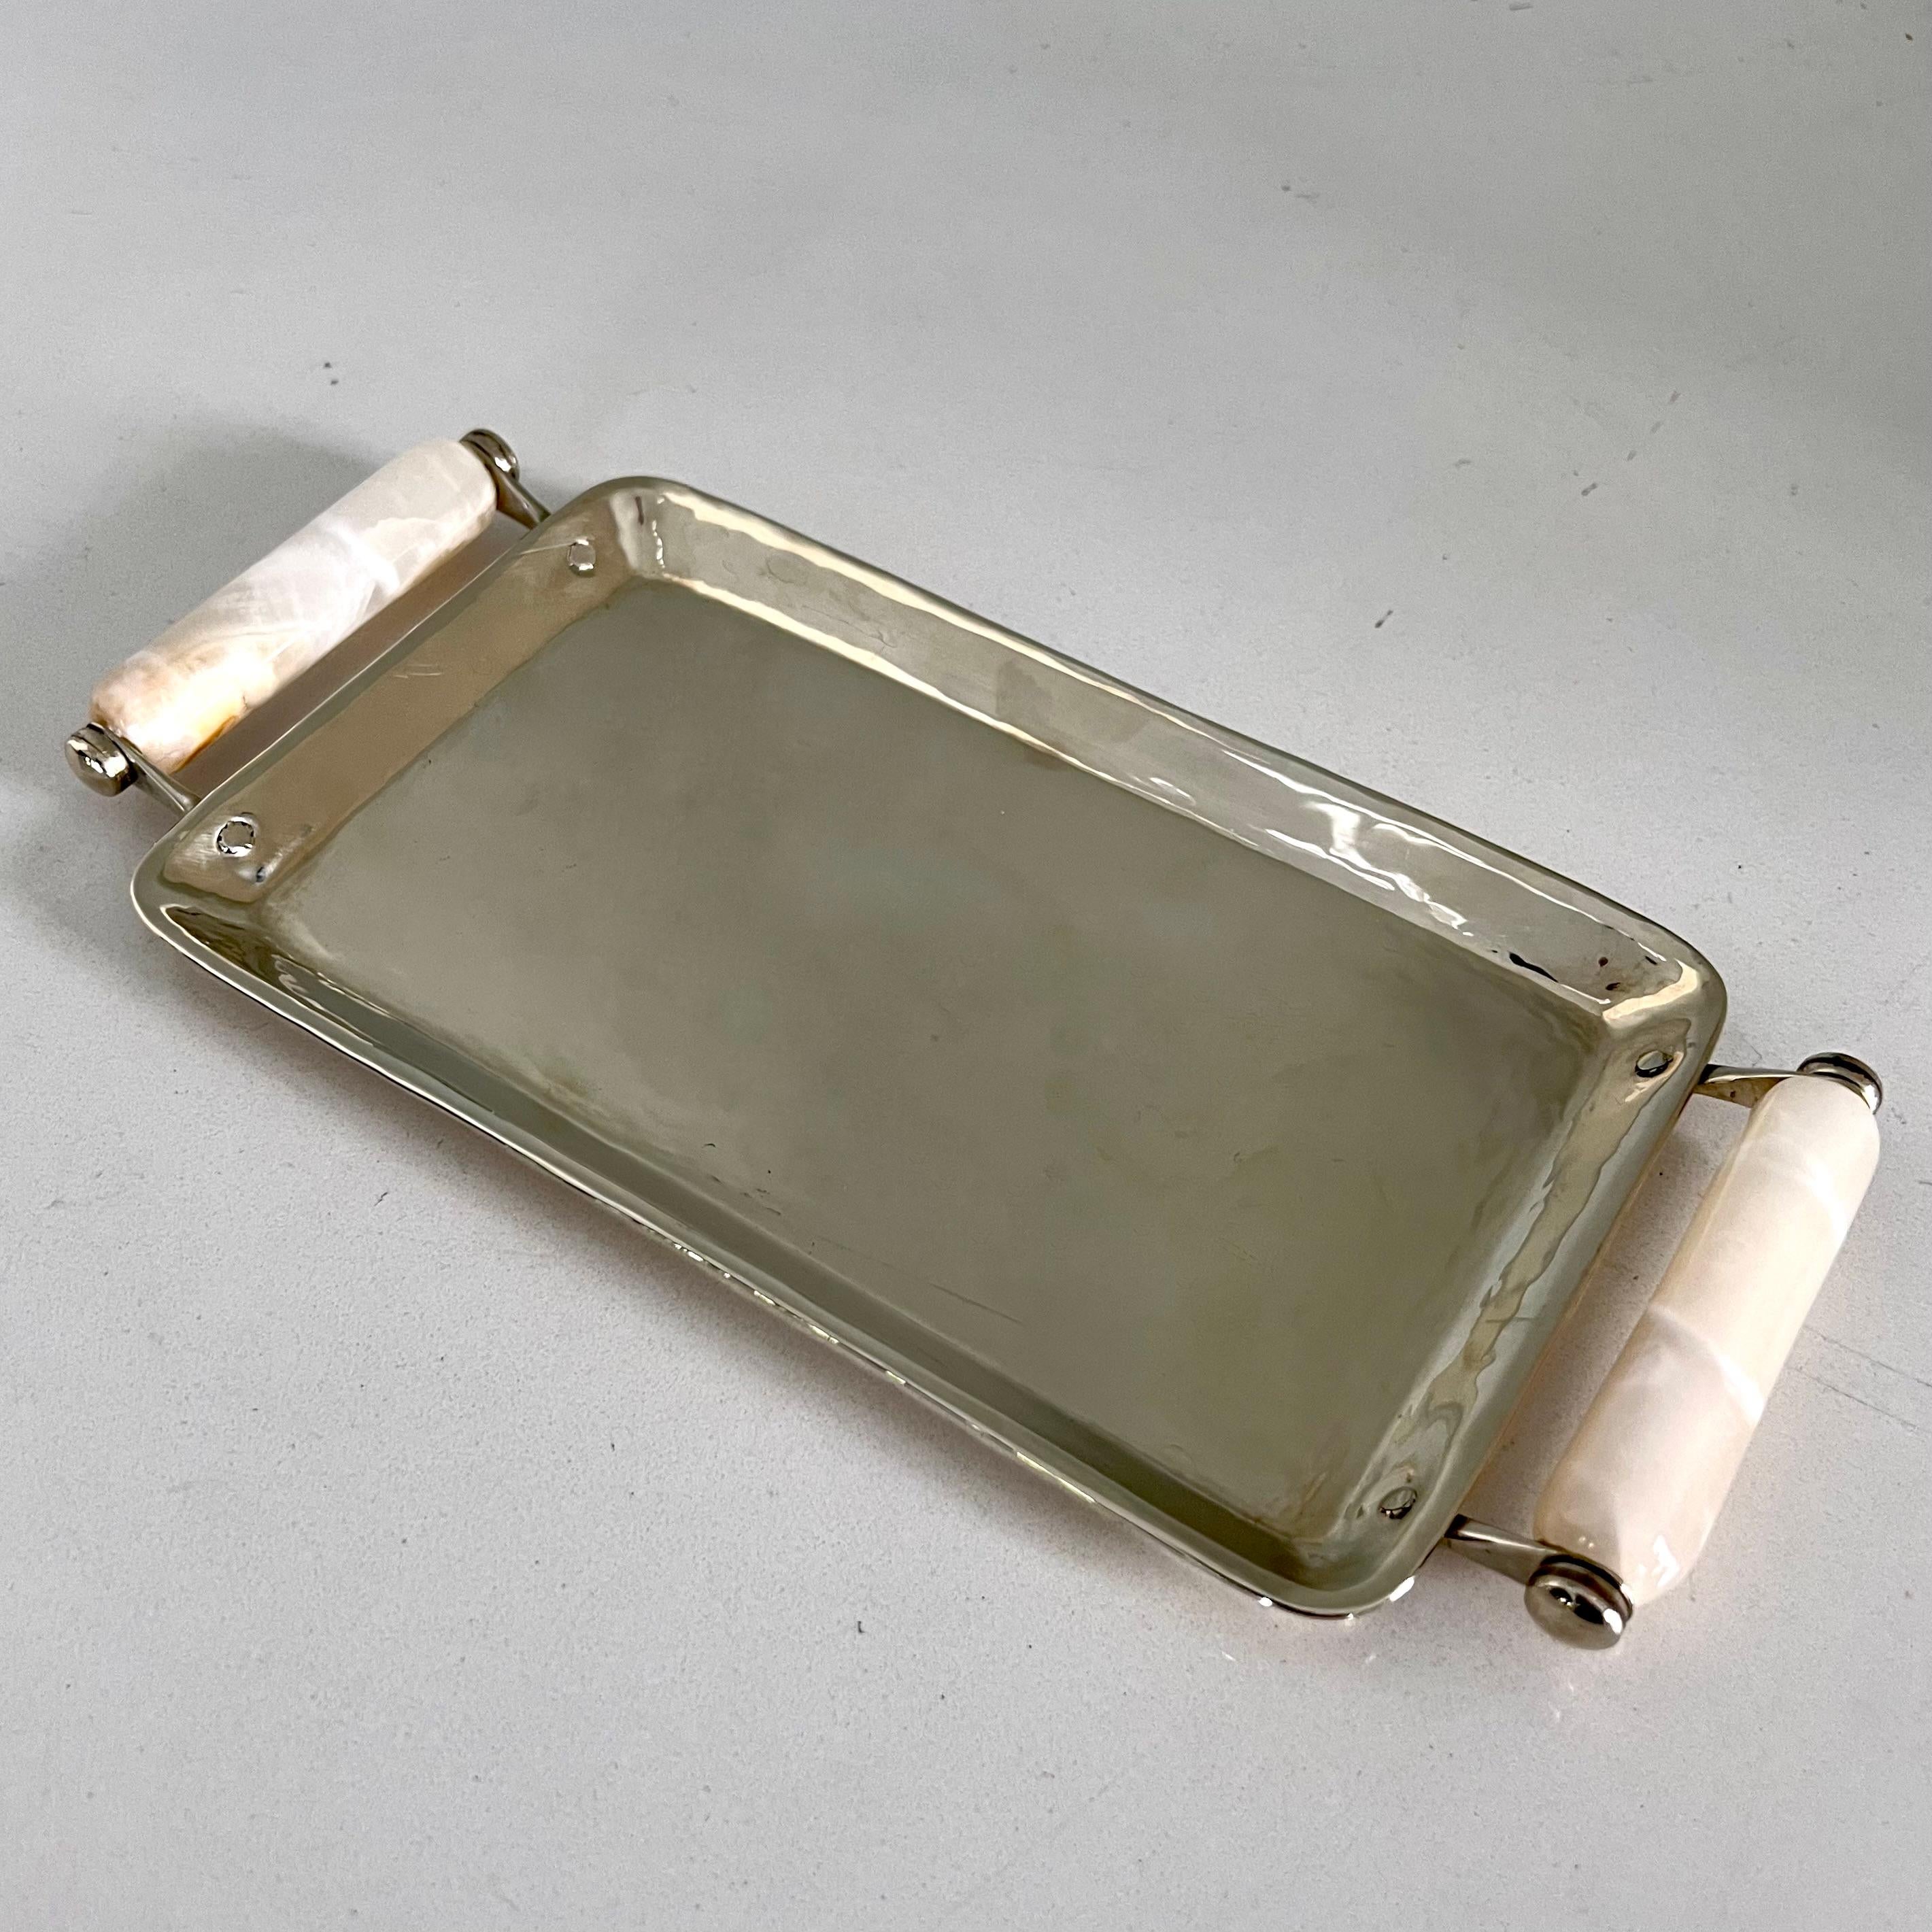 Silver plate tray with Onyx handles from Argentina. A compliment to any vanity or side table. Great for serving cocktails. Polished and ready to be used. 

See video for exquisite details.